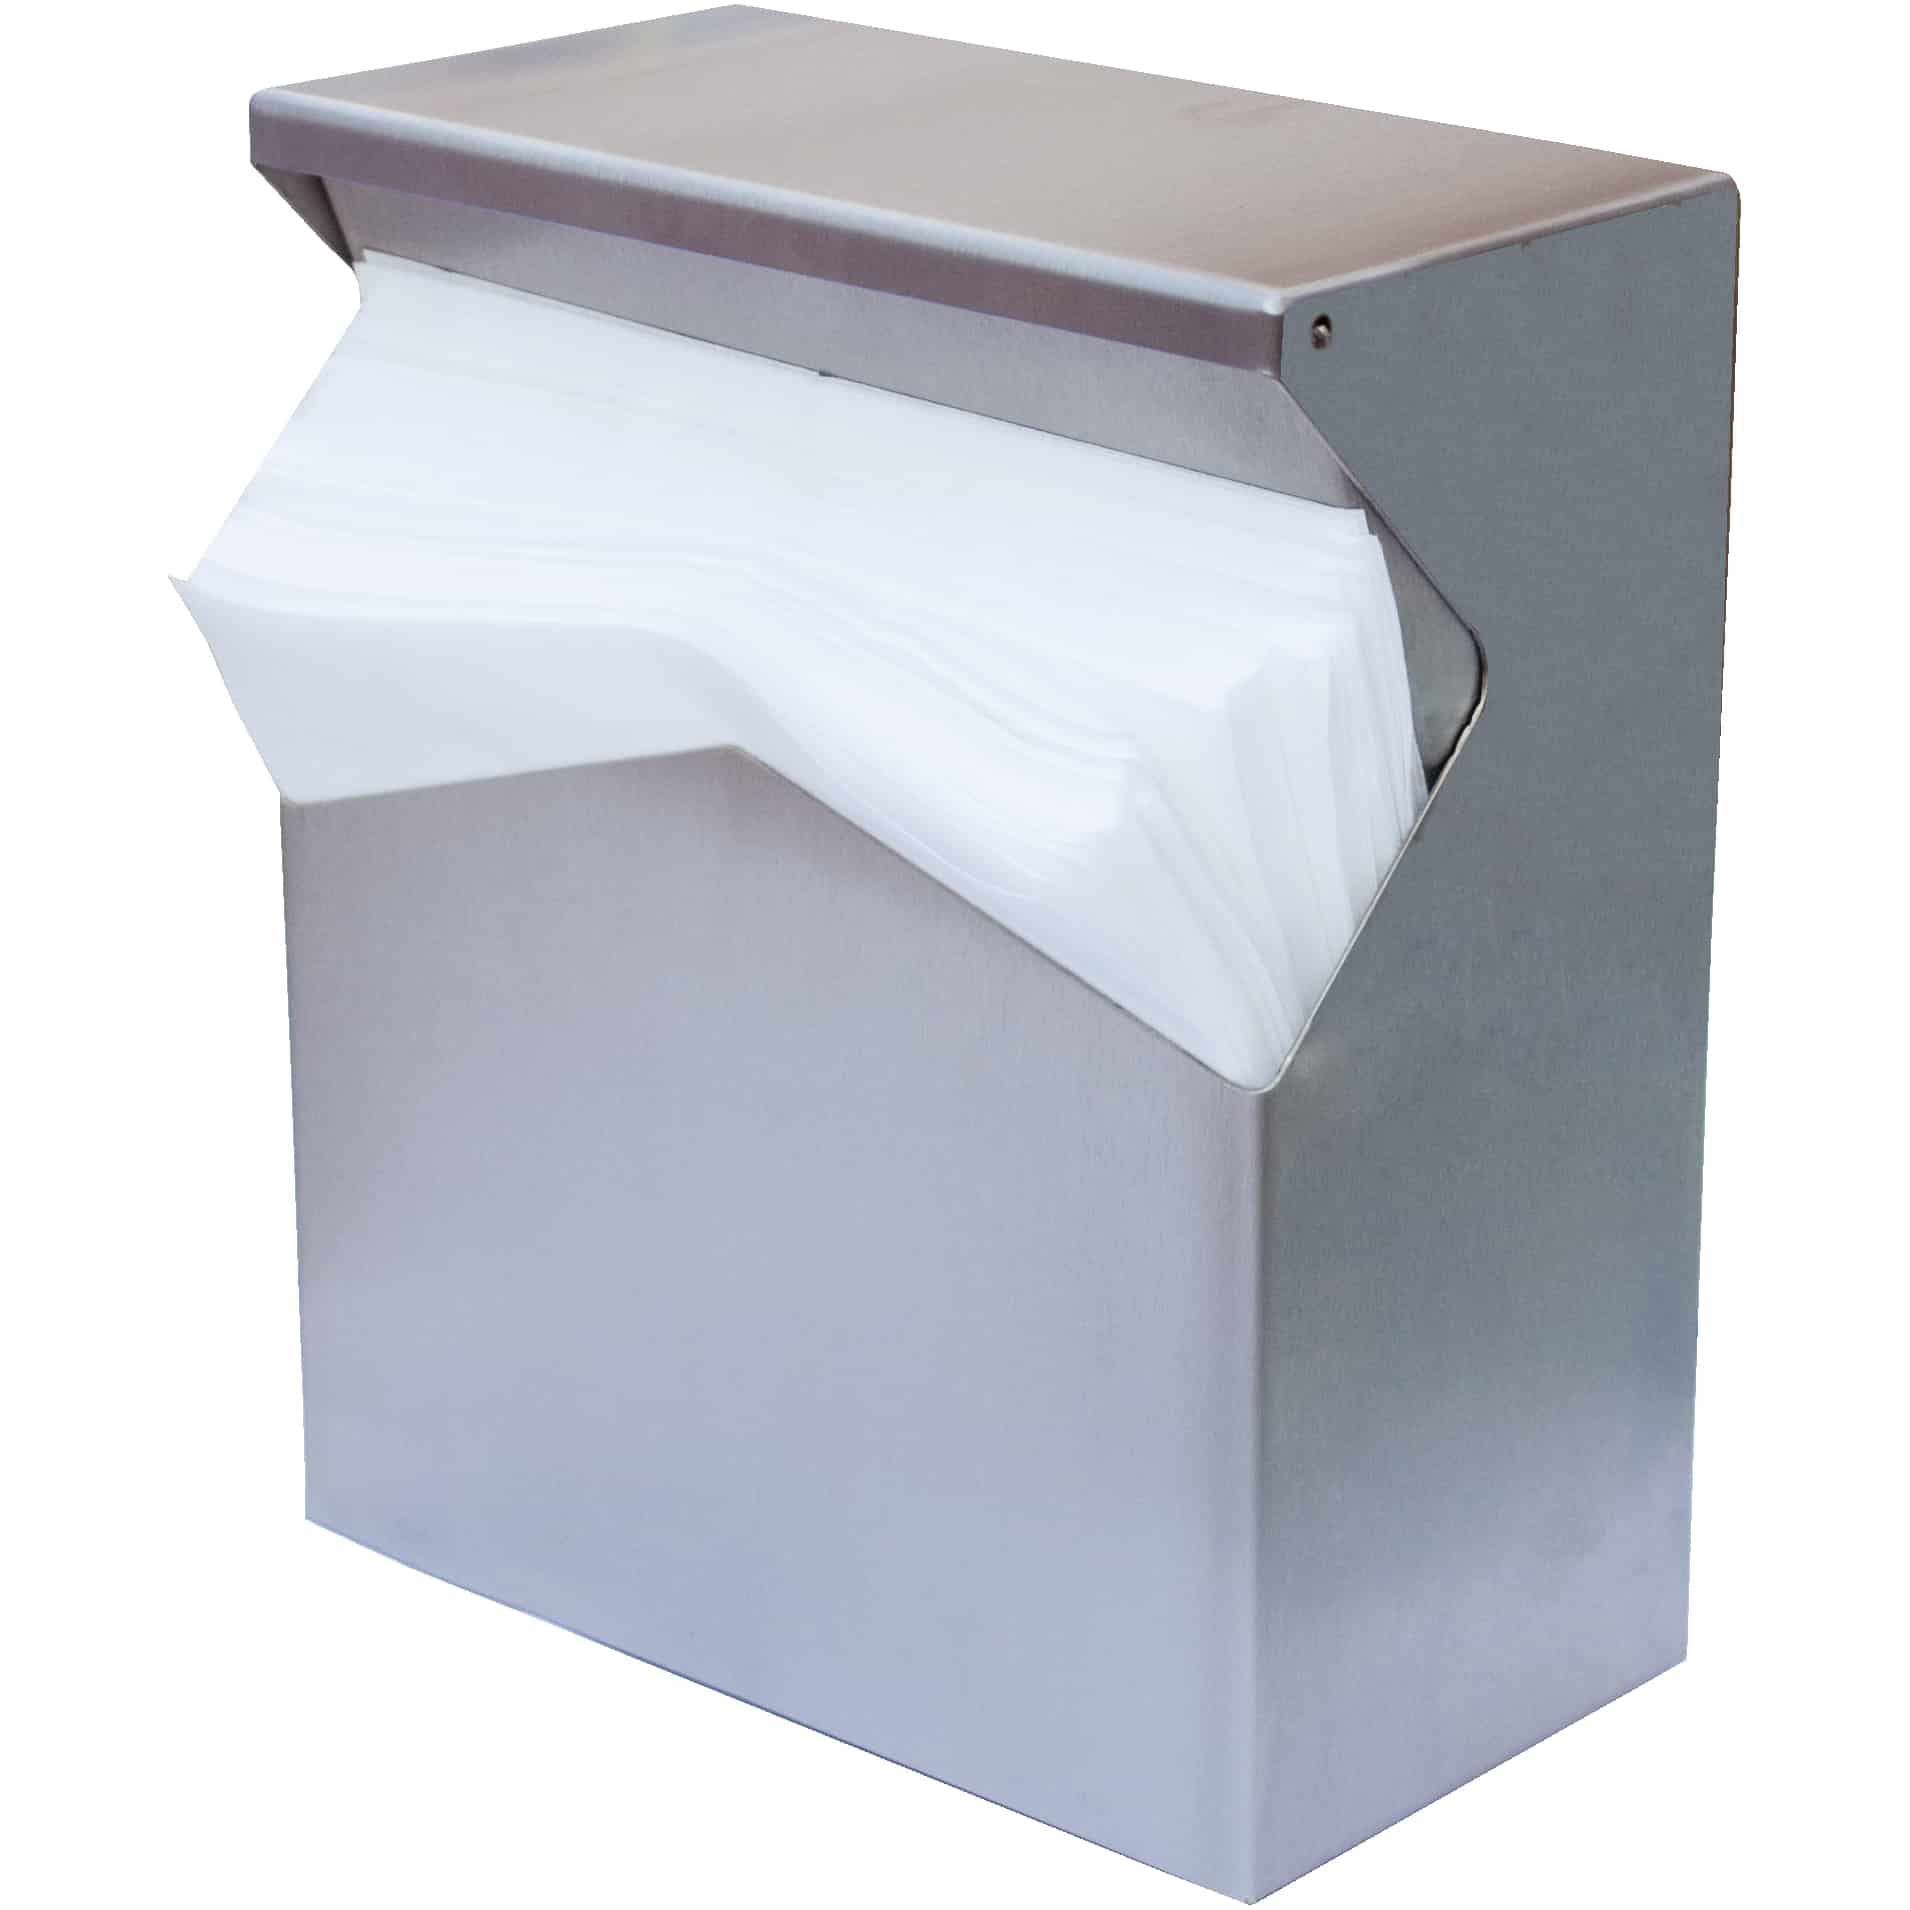 Wall mounted sterile wipes dispenser